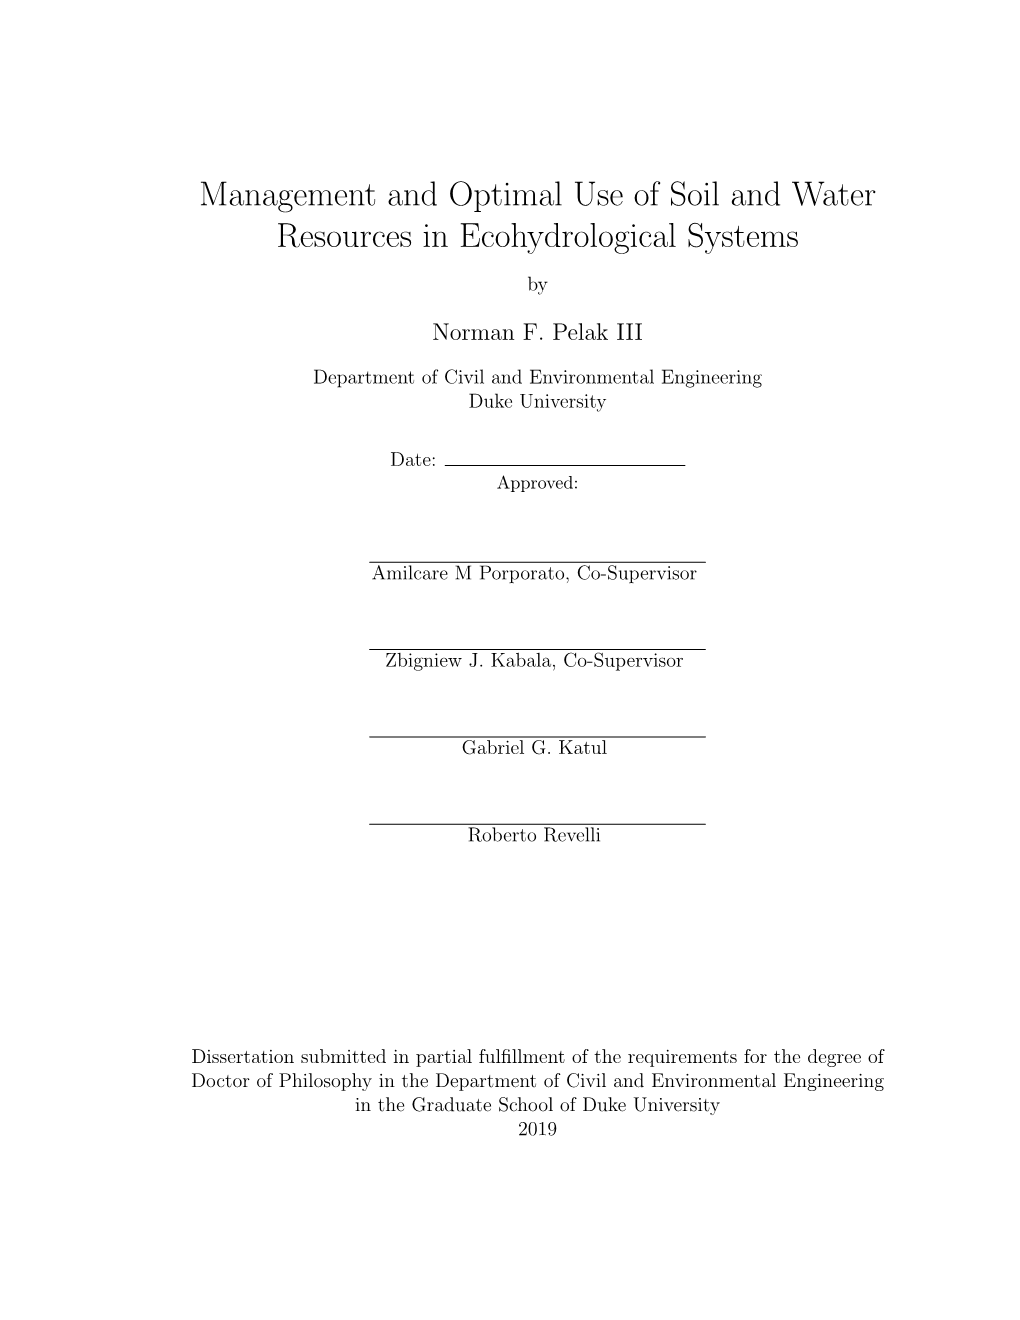 Management and Optimal Use of Soil and Water Resources in Ecohydrological Systems